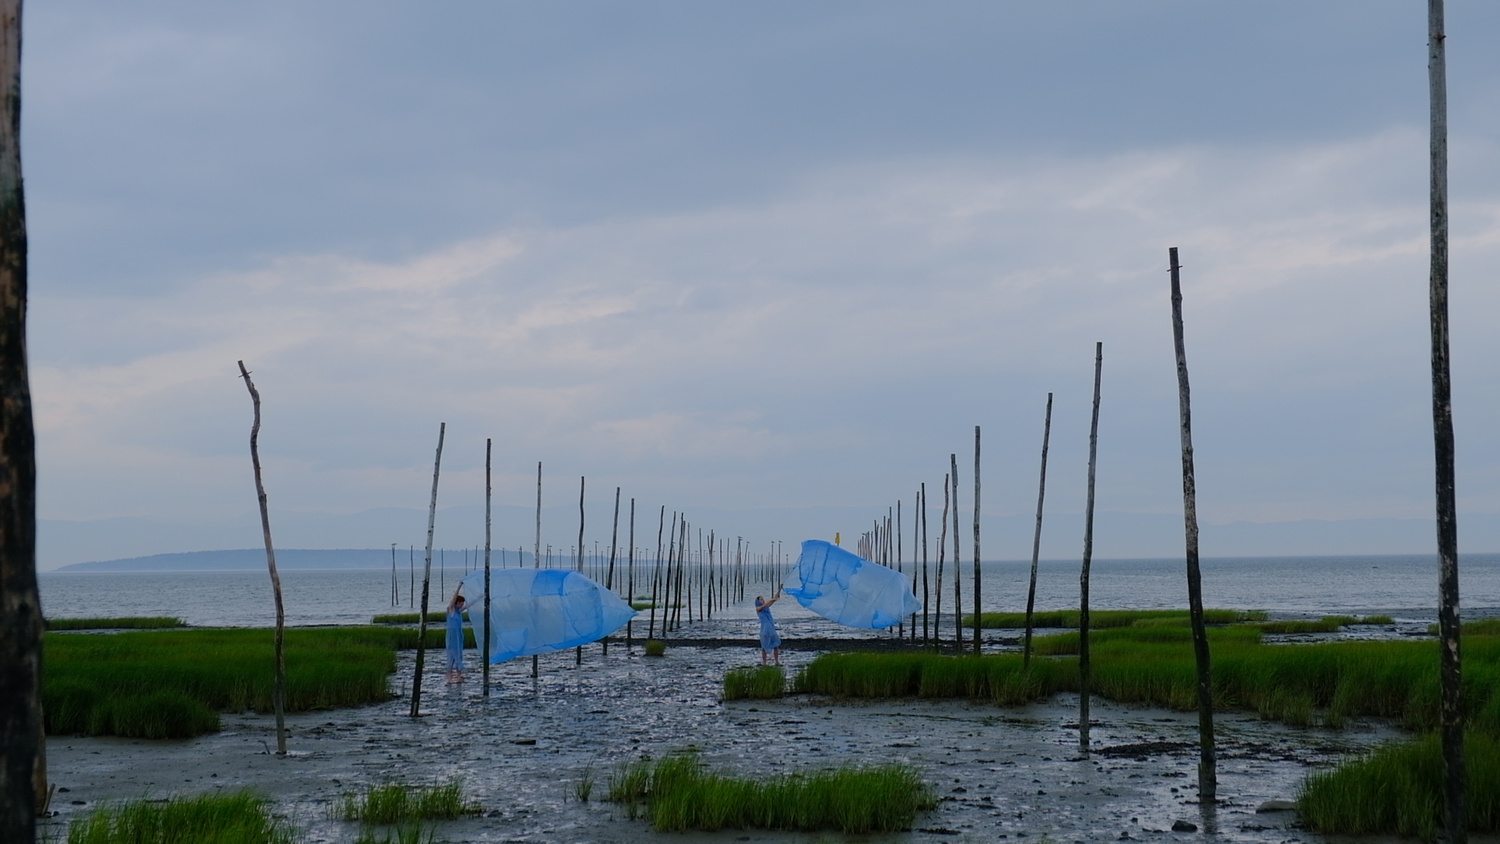 Two blue cloaked women are standing in a marsh by the waters edge, they are each holding blue plastic bags like sails to catch the wind.